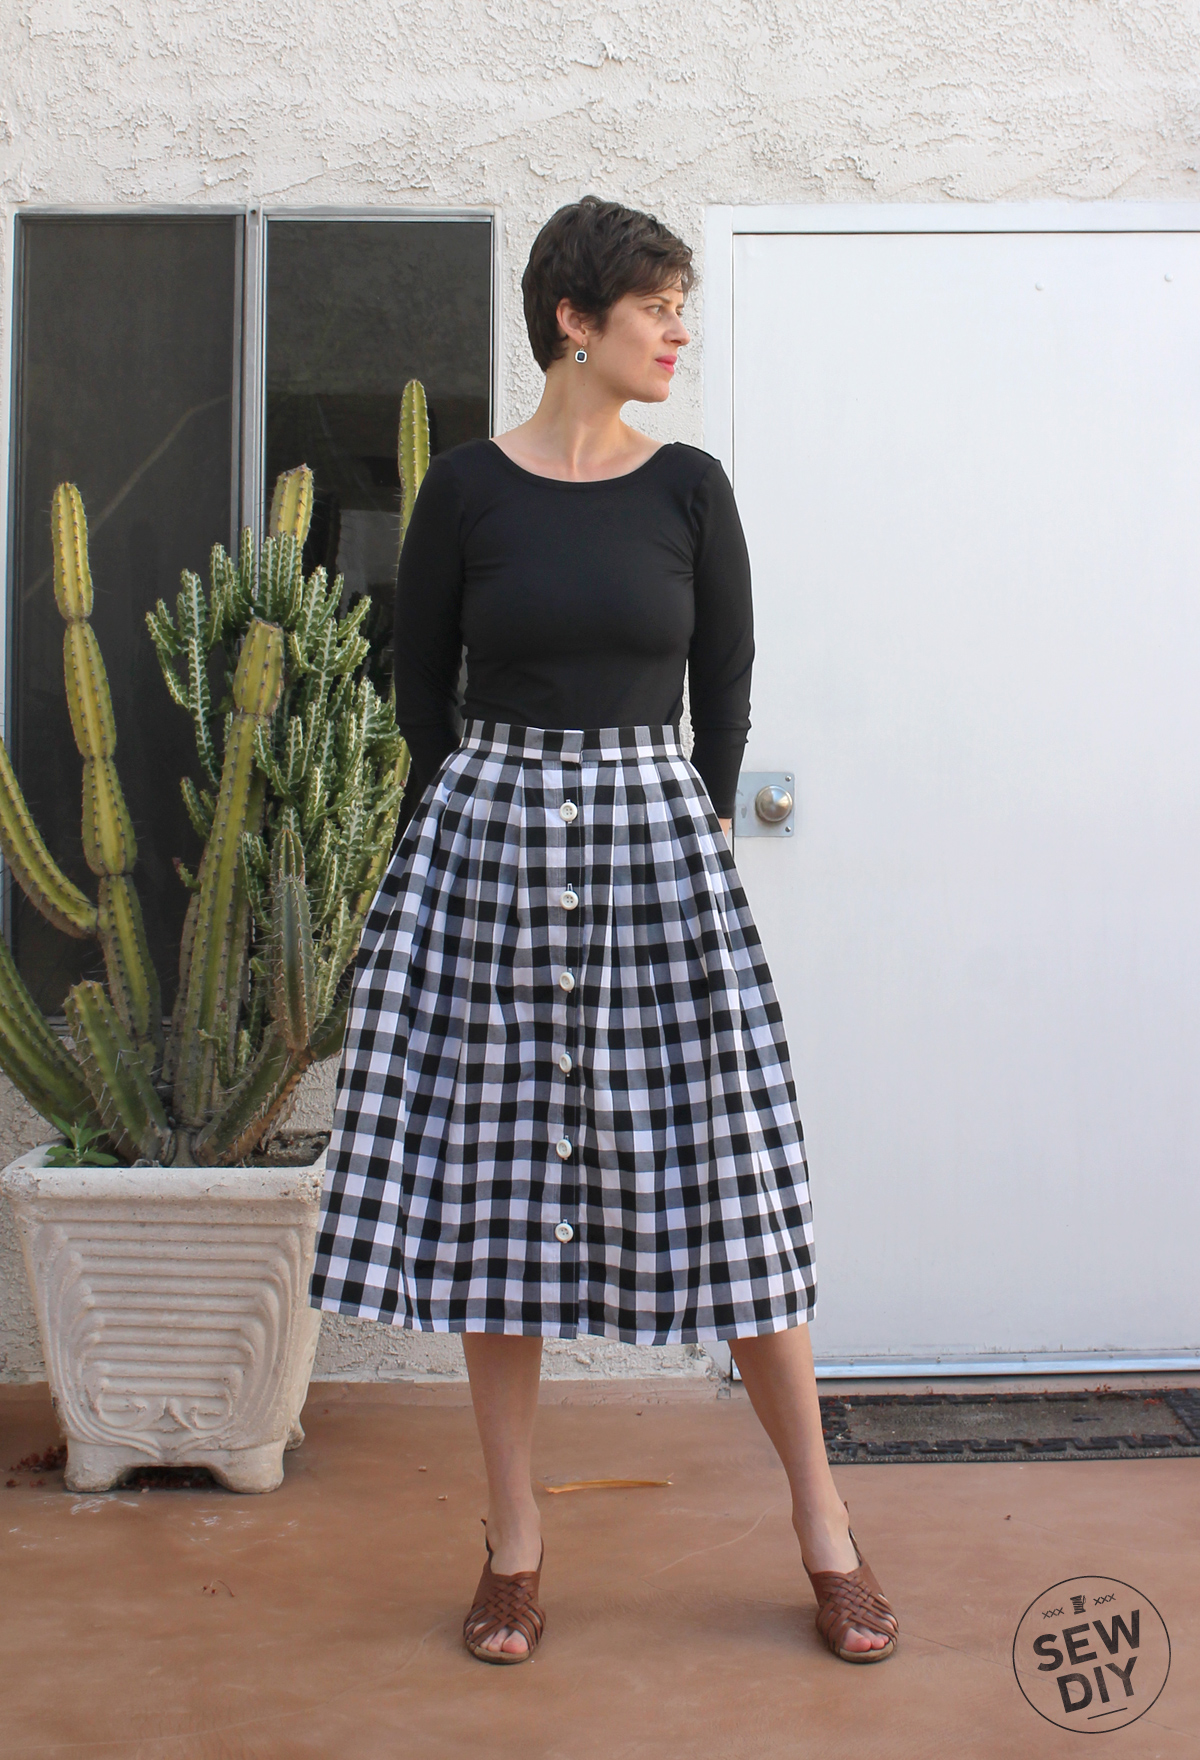 How to Copy a Pleated Skirt - Threads